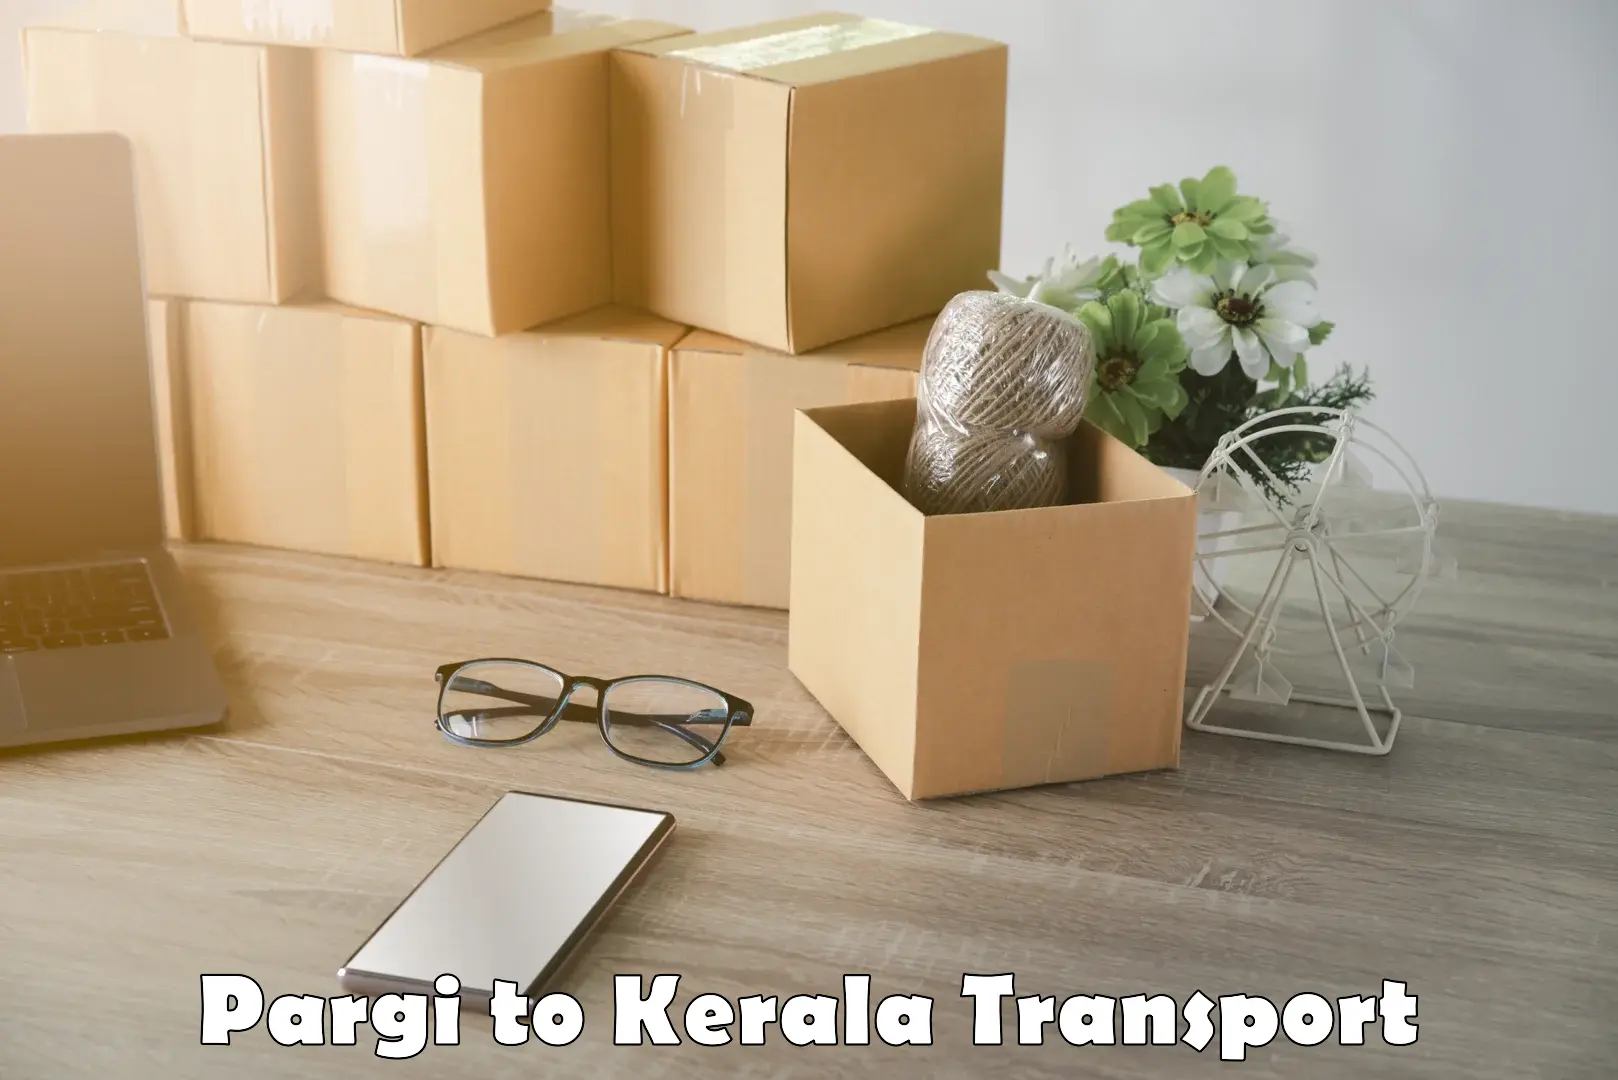 Container transportation services in Pargi to Cochin